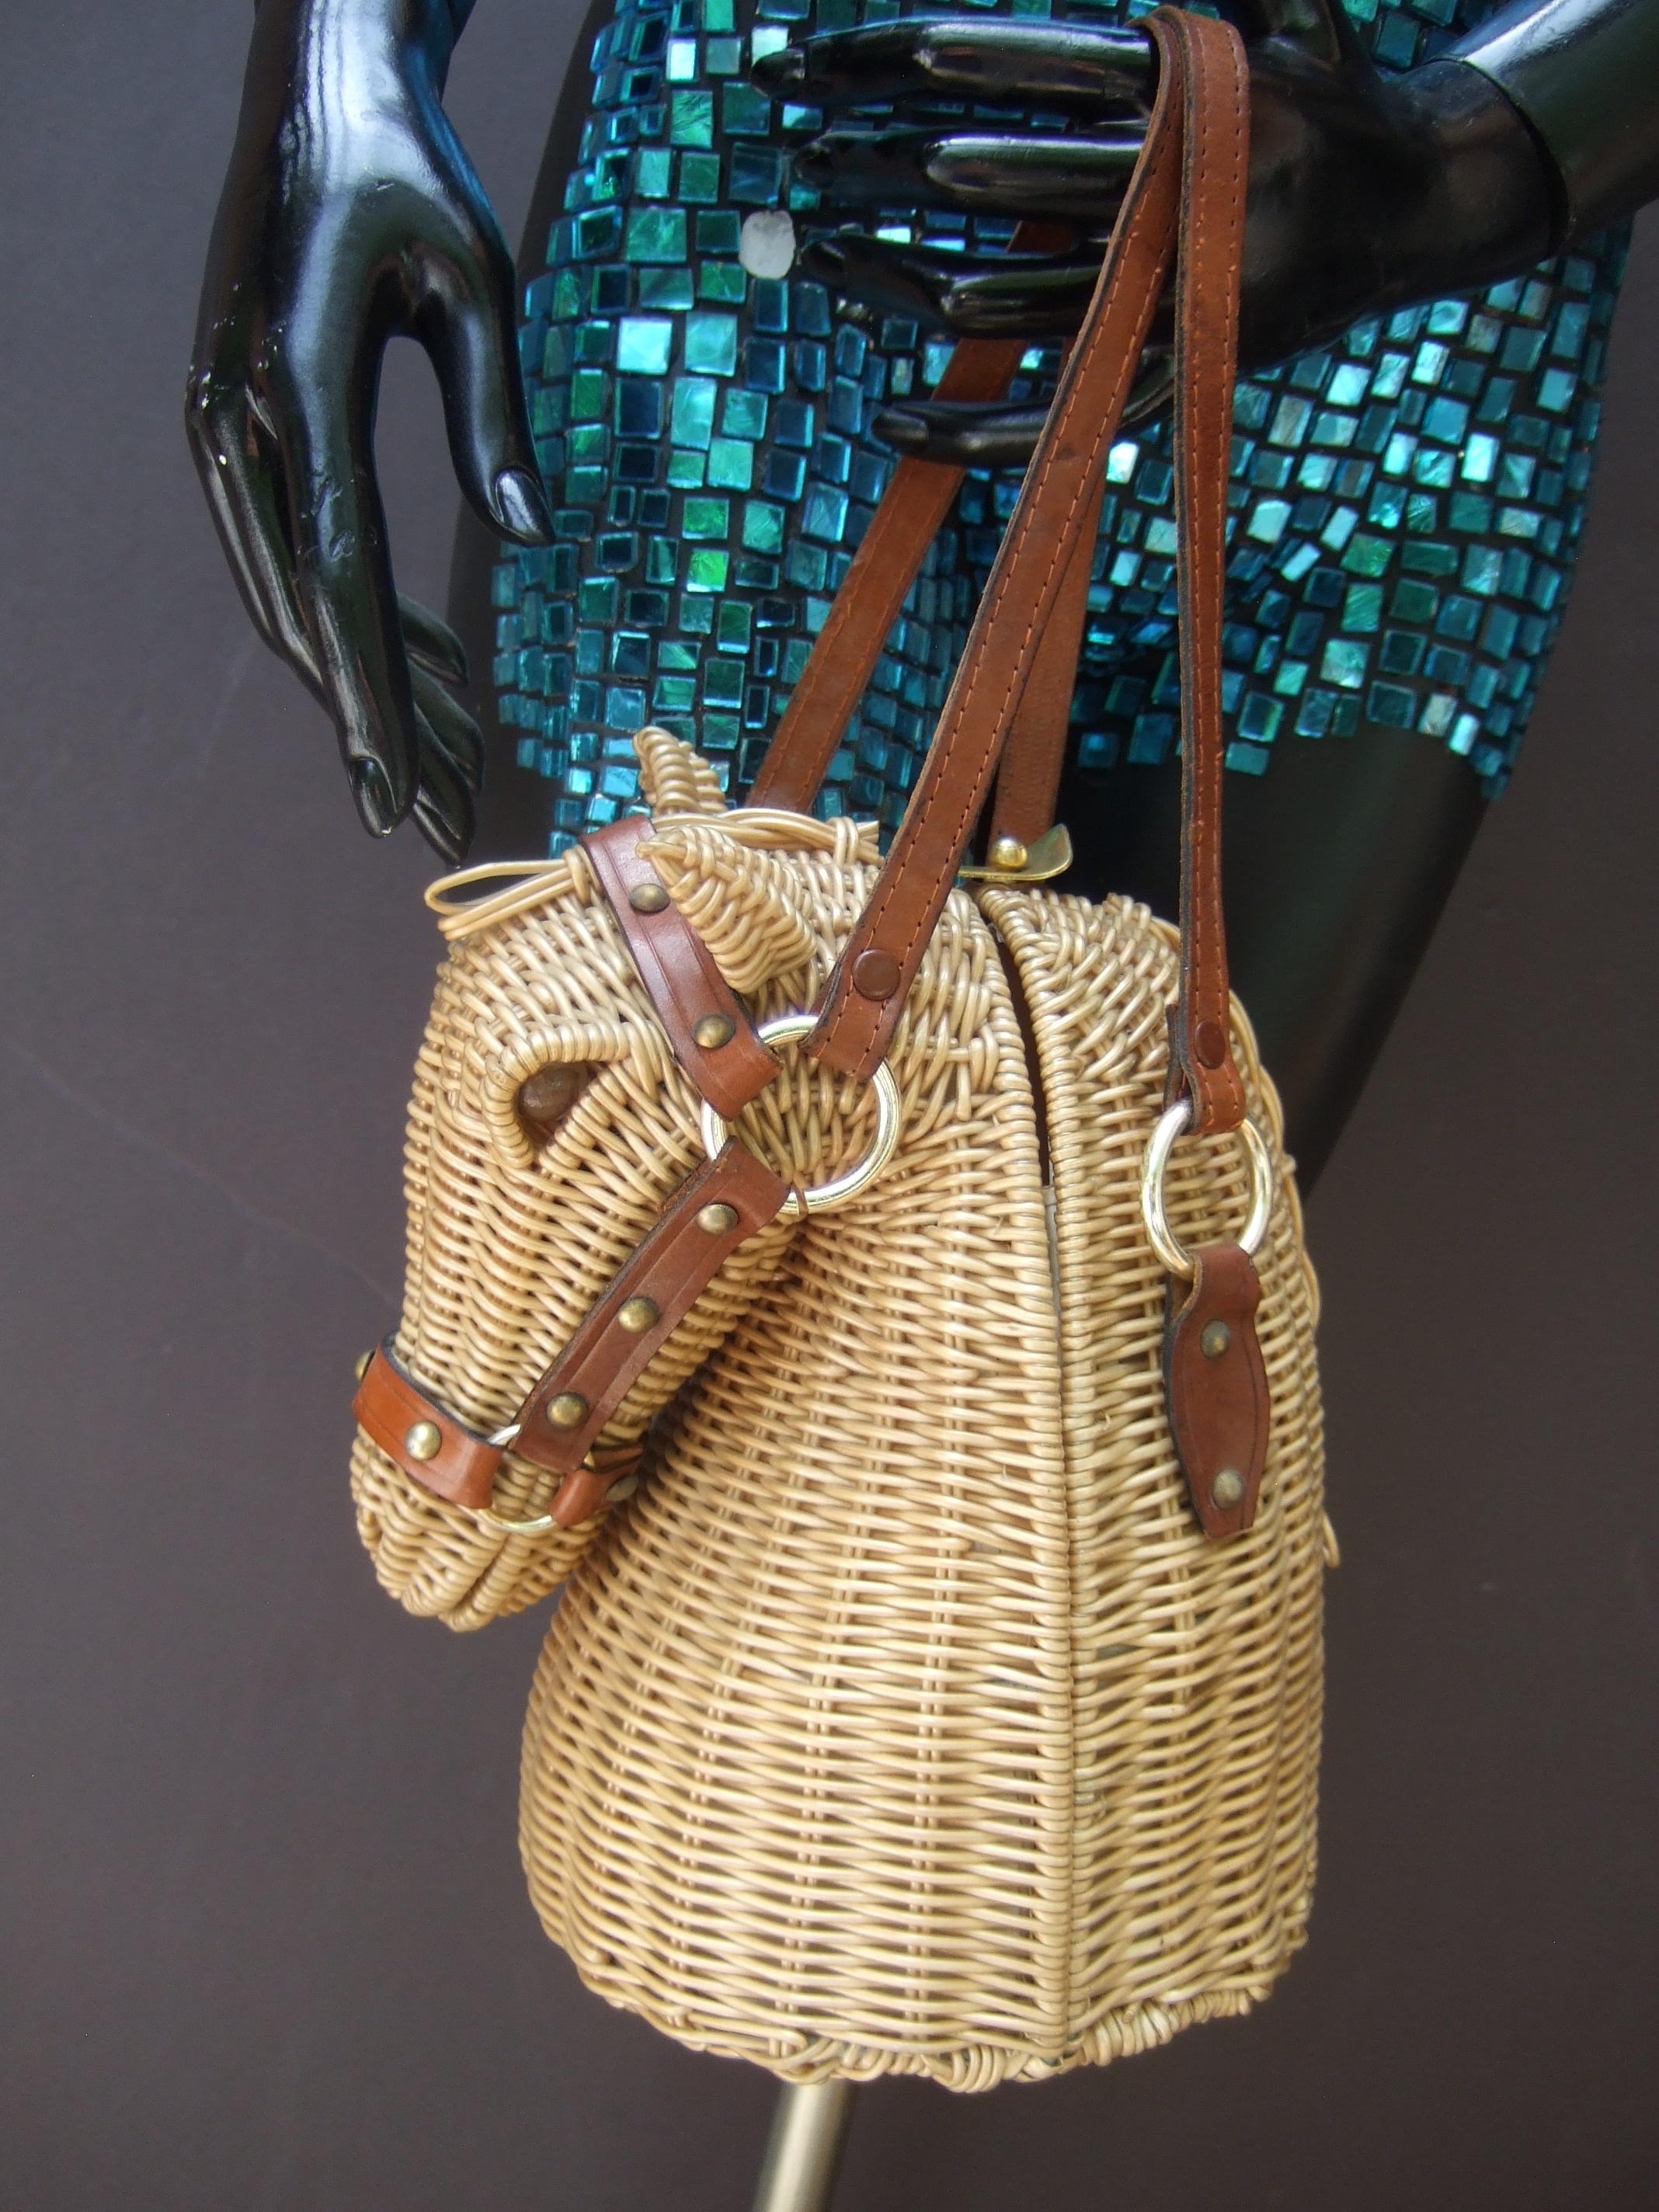 Extremely Rare Wicker Rattan Equine Handbag Designed by Marcus Brothers c 1970 5